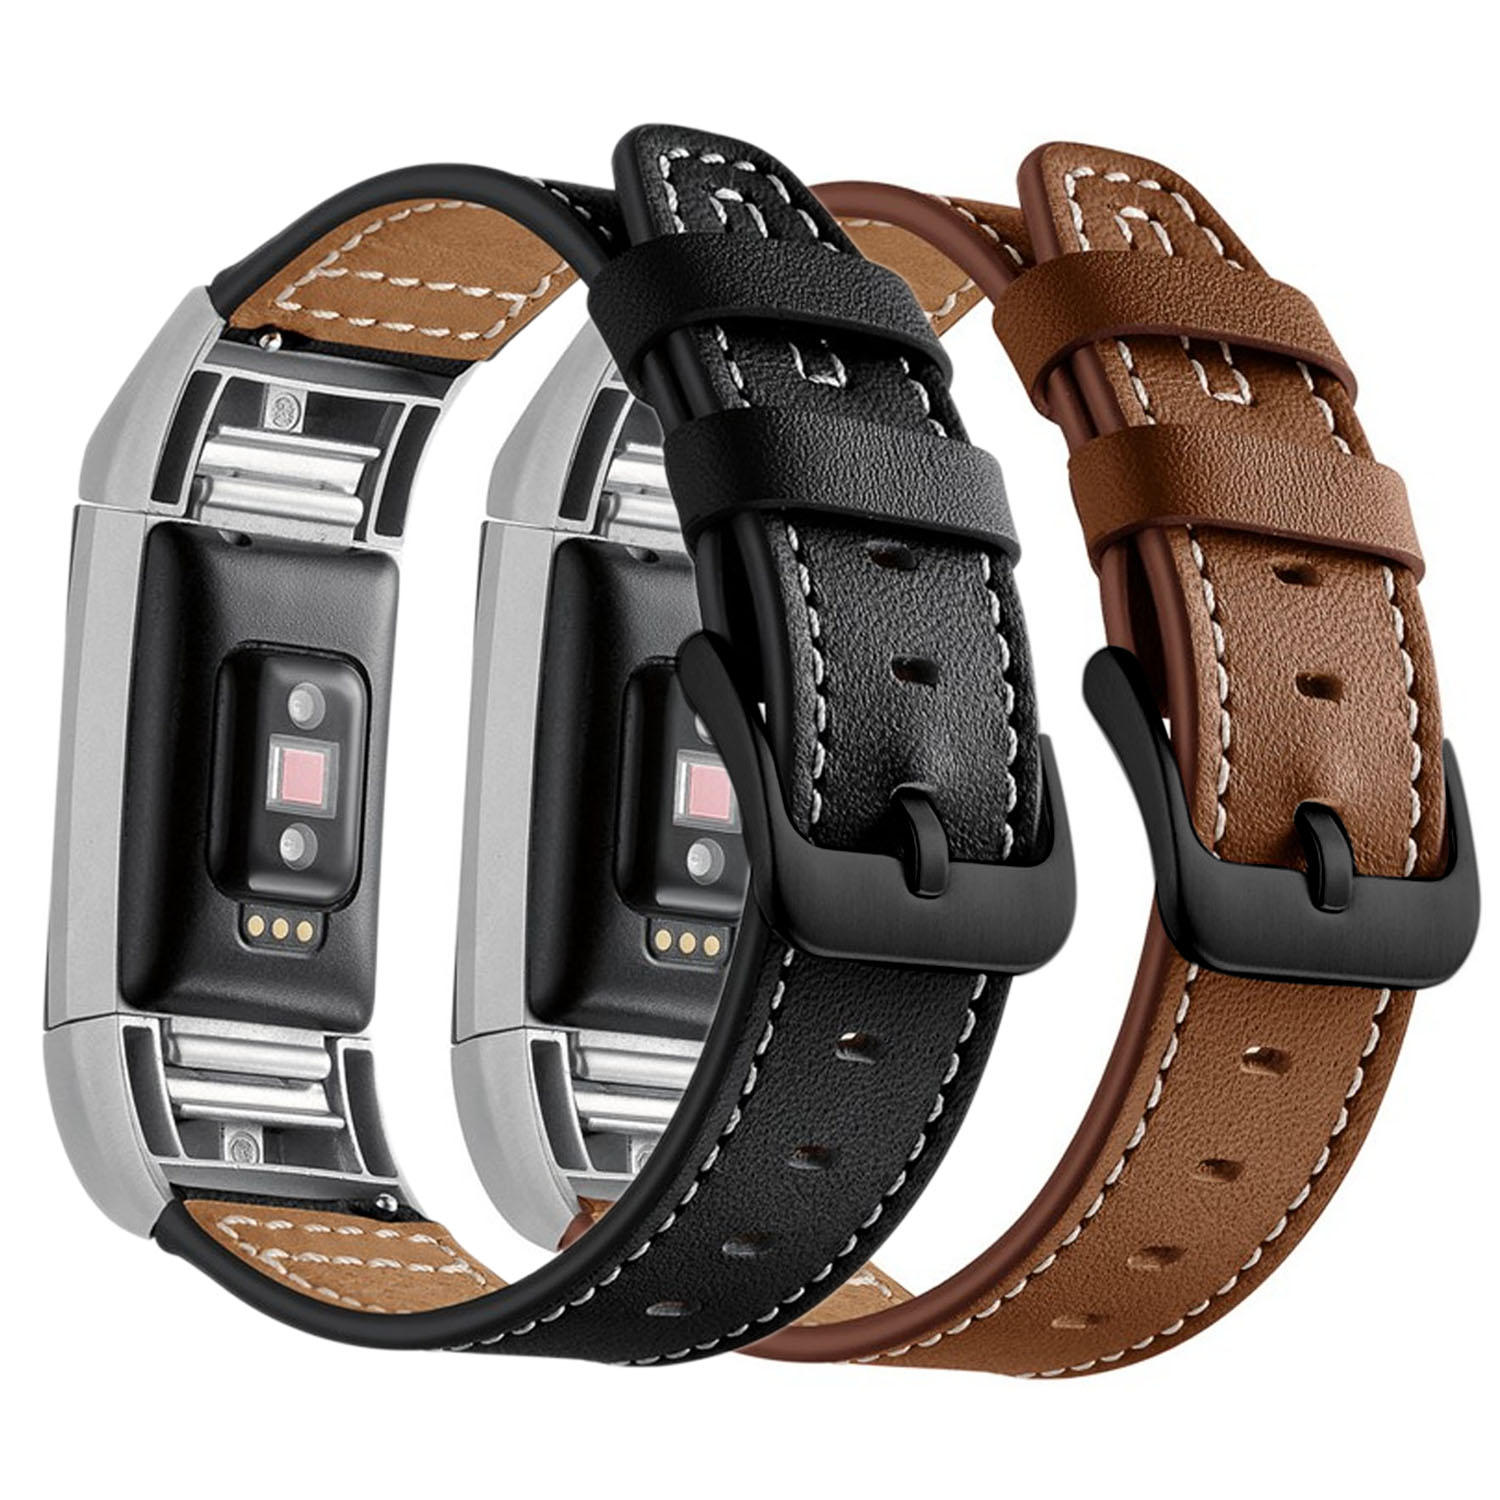 Bakeey Genuine Leather Watch Band Wristband Strap for Xiaomi Amazfit Bip Youth Edition Smart Watch